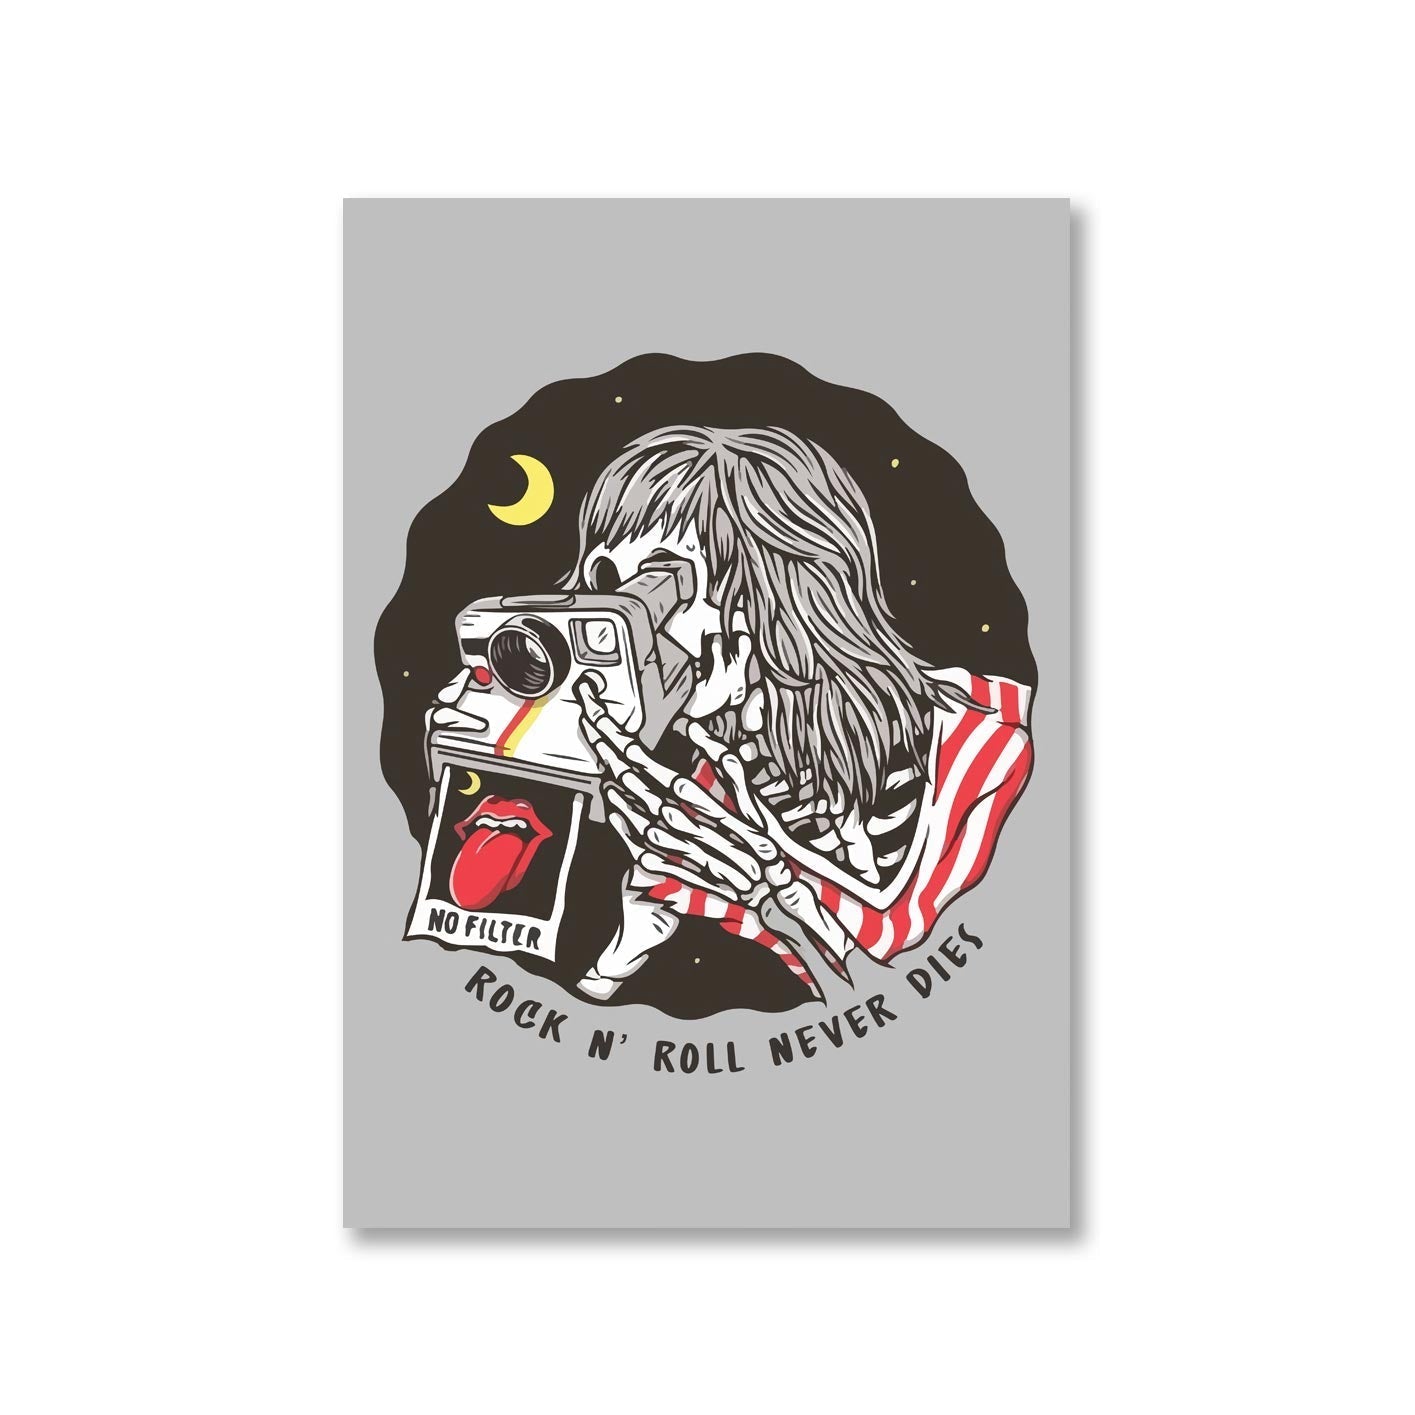 the rolling stones rock 'n roll never dies poster wall art buy online united states of america usa the banyan tee tbt a4